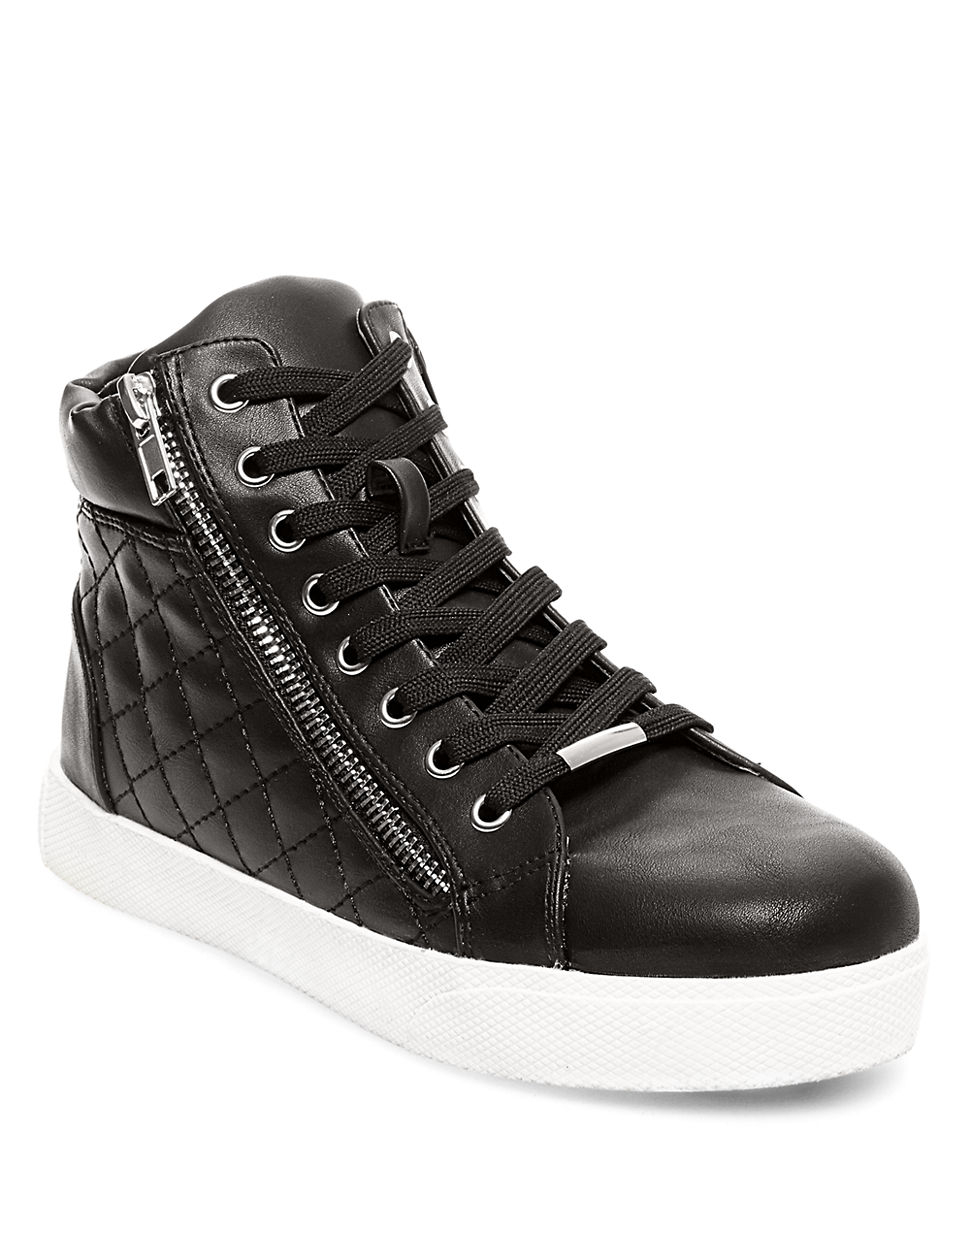 Steve Madden Elyka Leather Side Zipper Perforated Athletic ...